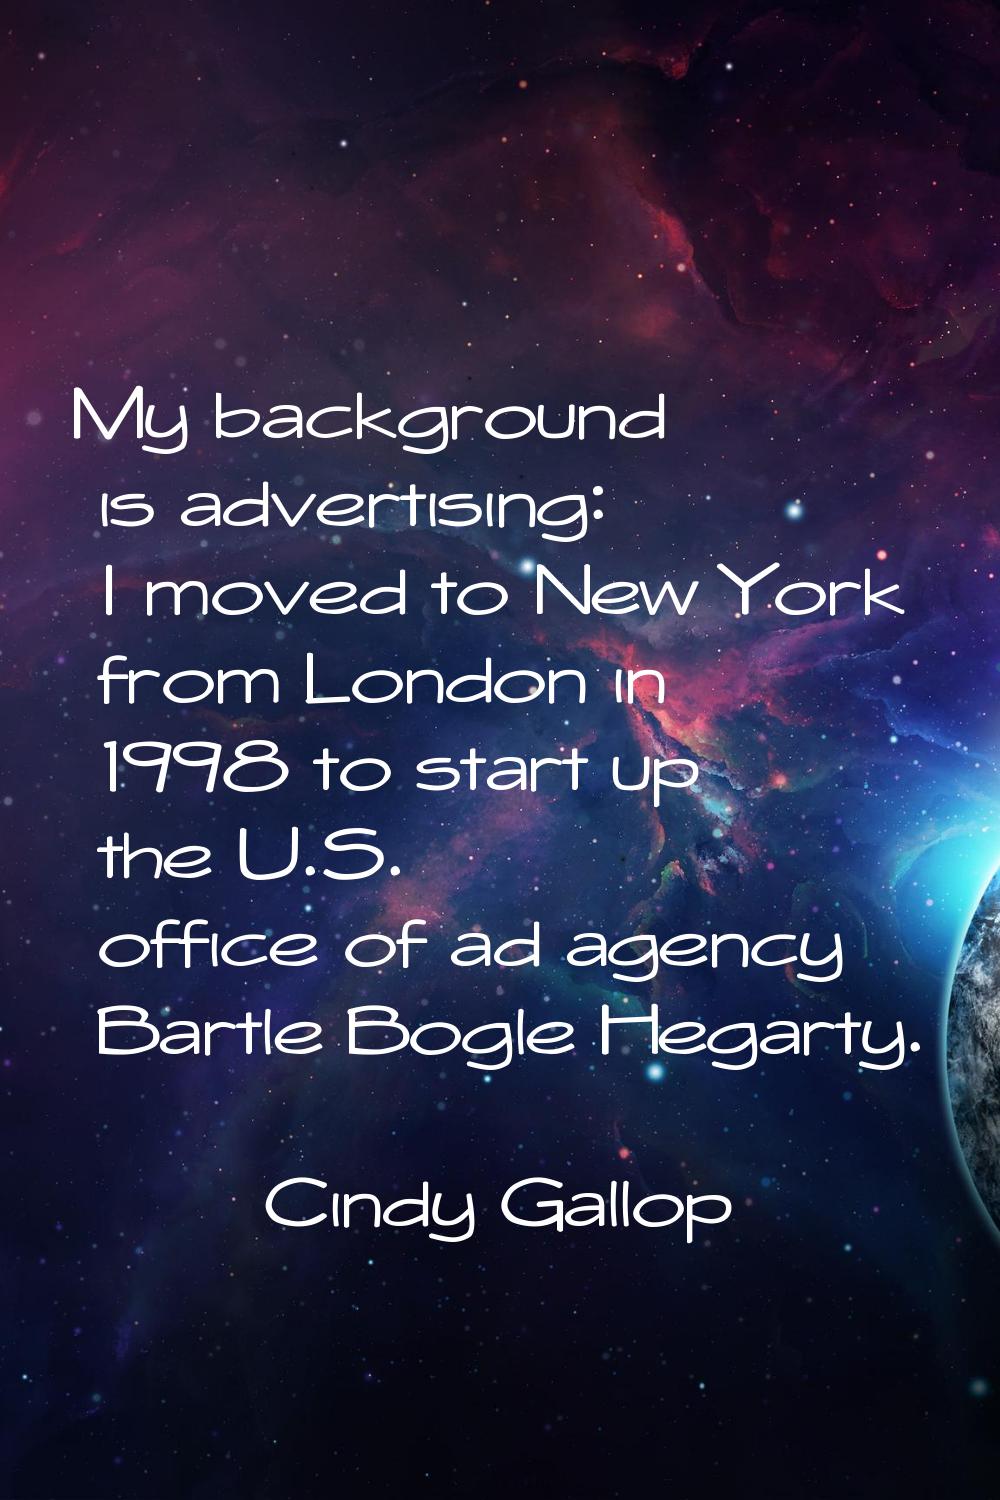 My background is advertising: I moved to New York from London in 1998 to start up the U.S. office o